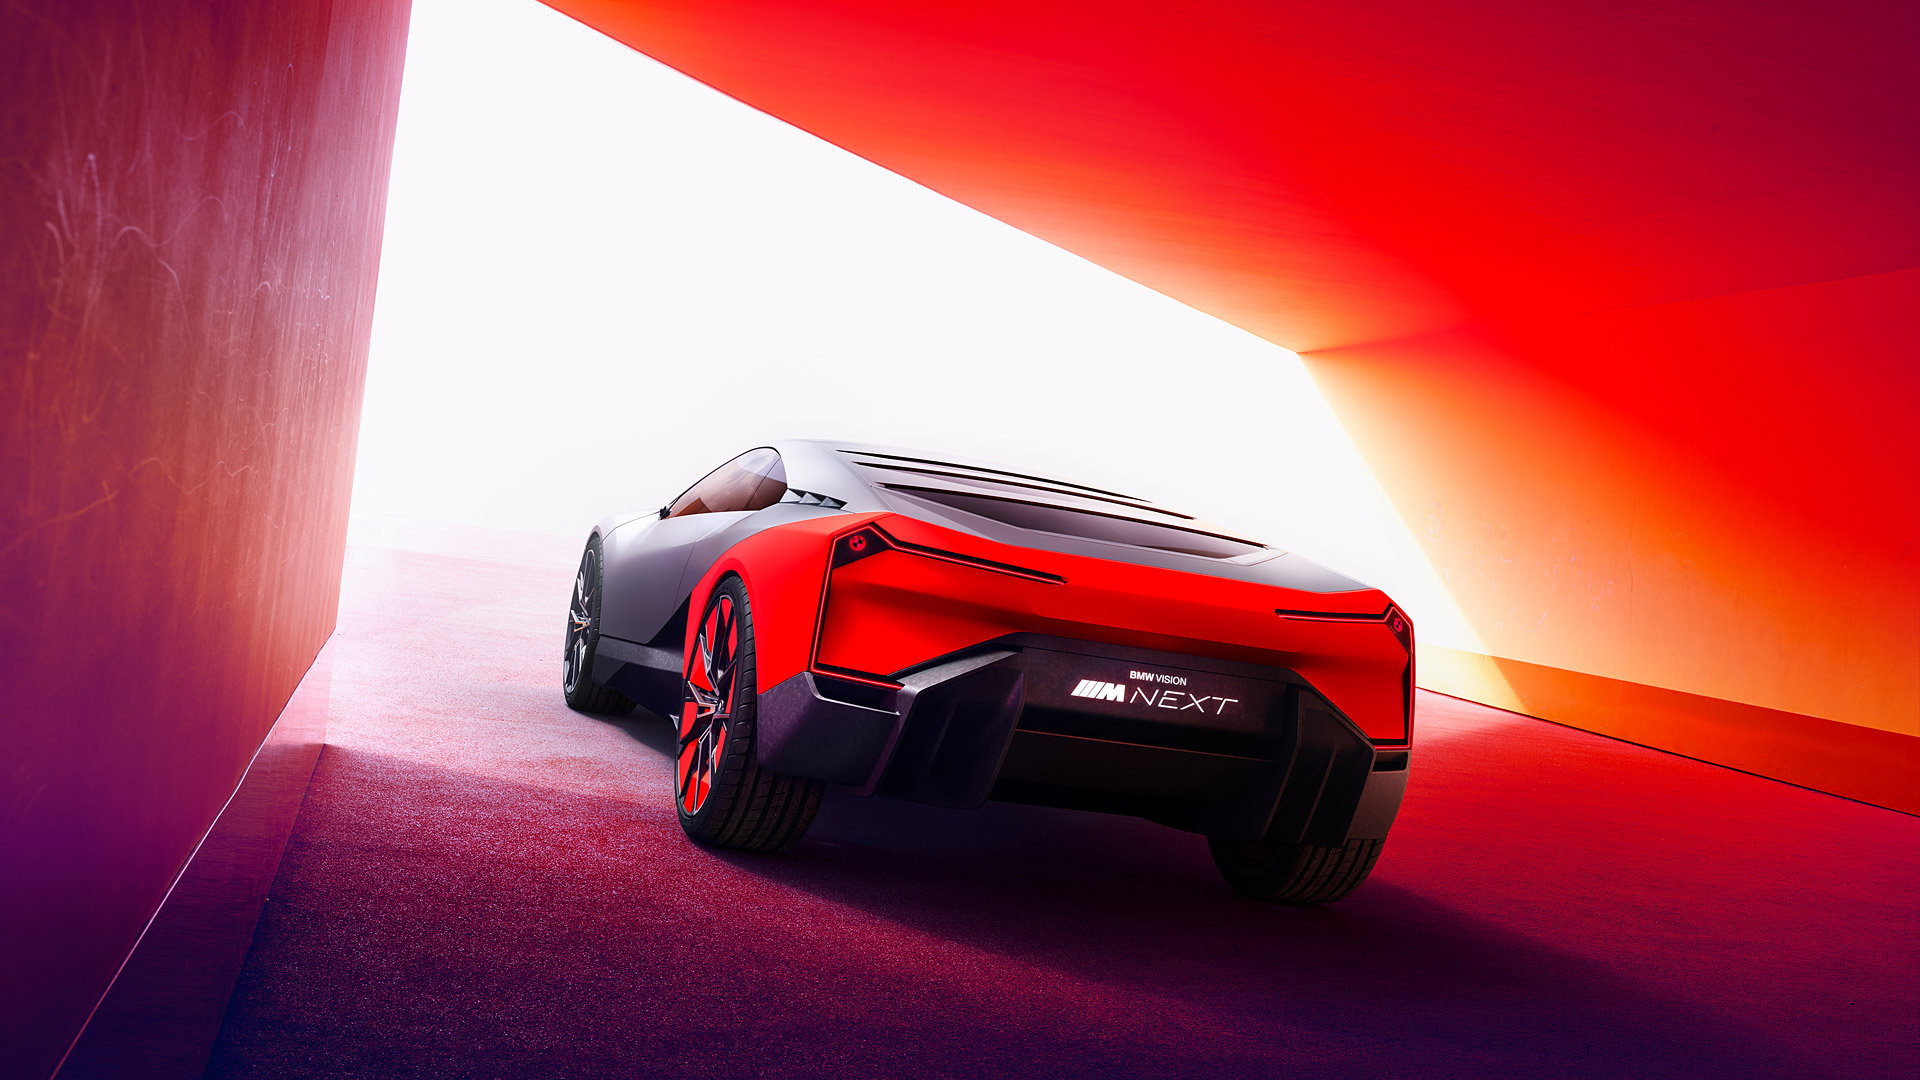 Bmw Vision M Next Concept Wallpaper HD Image Wsupercars